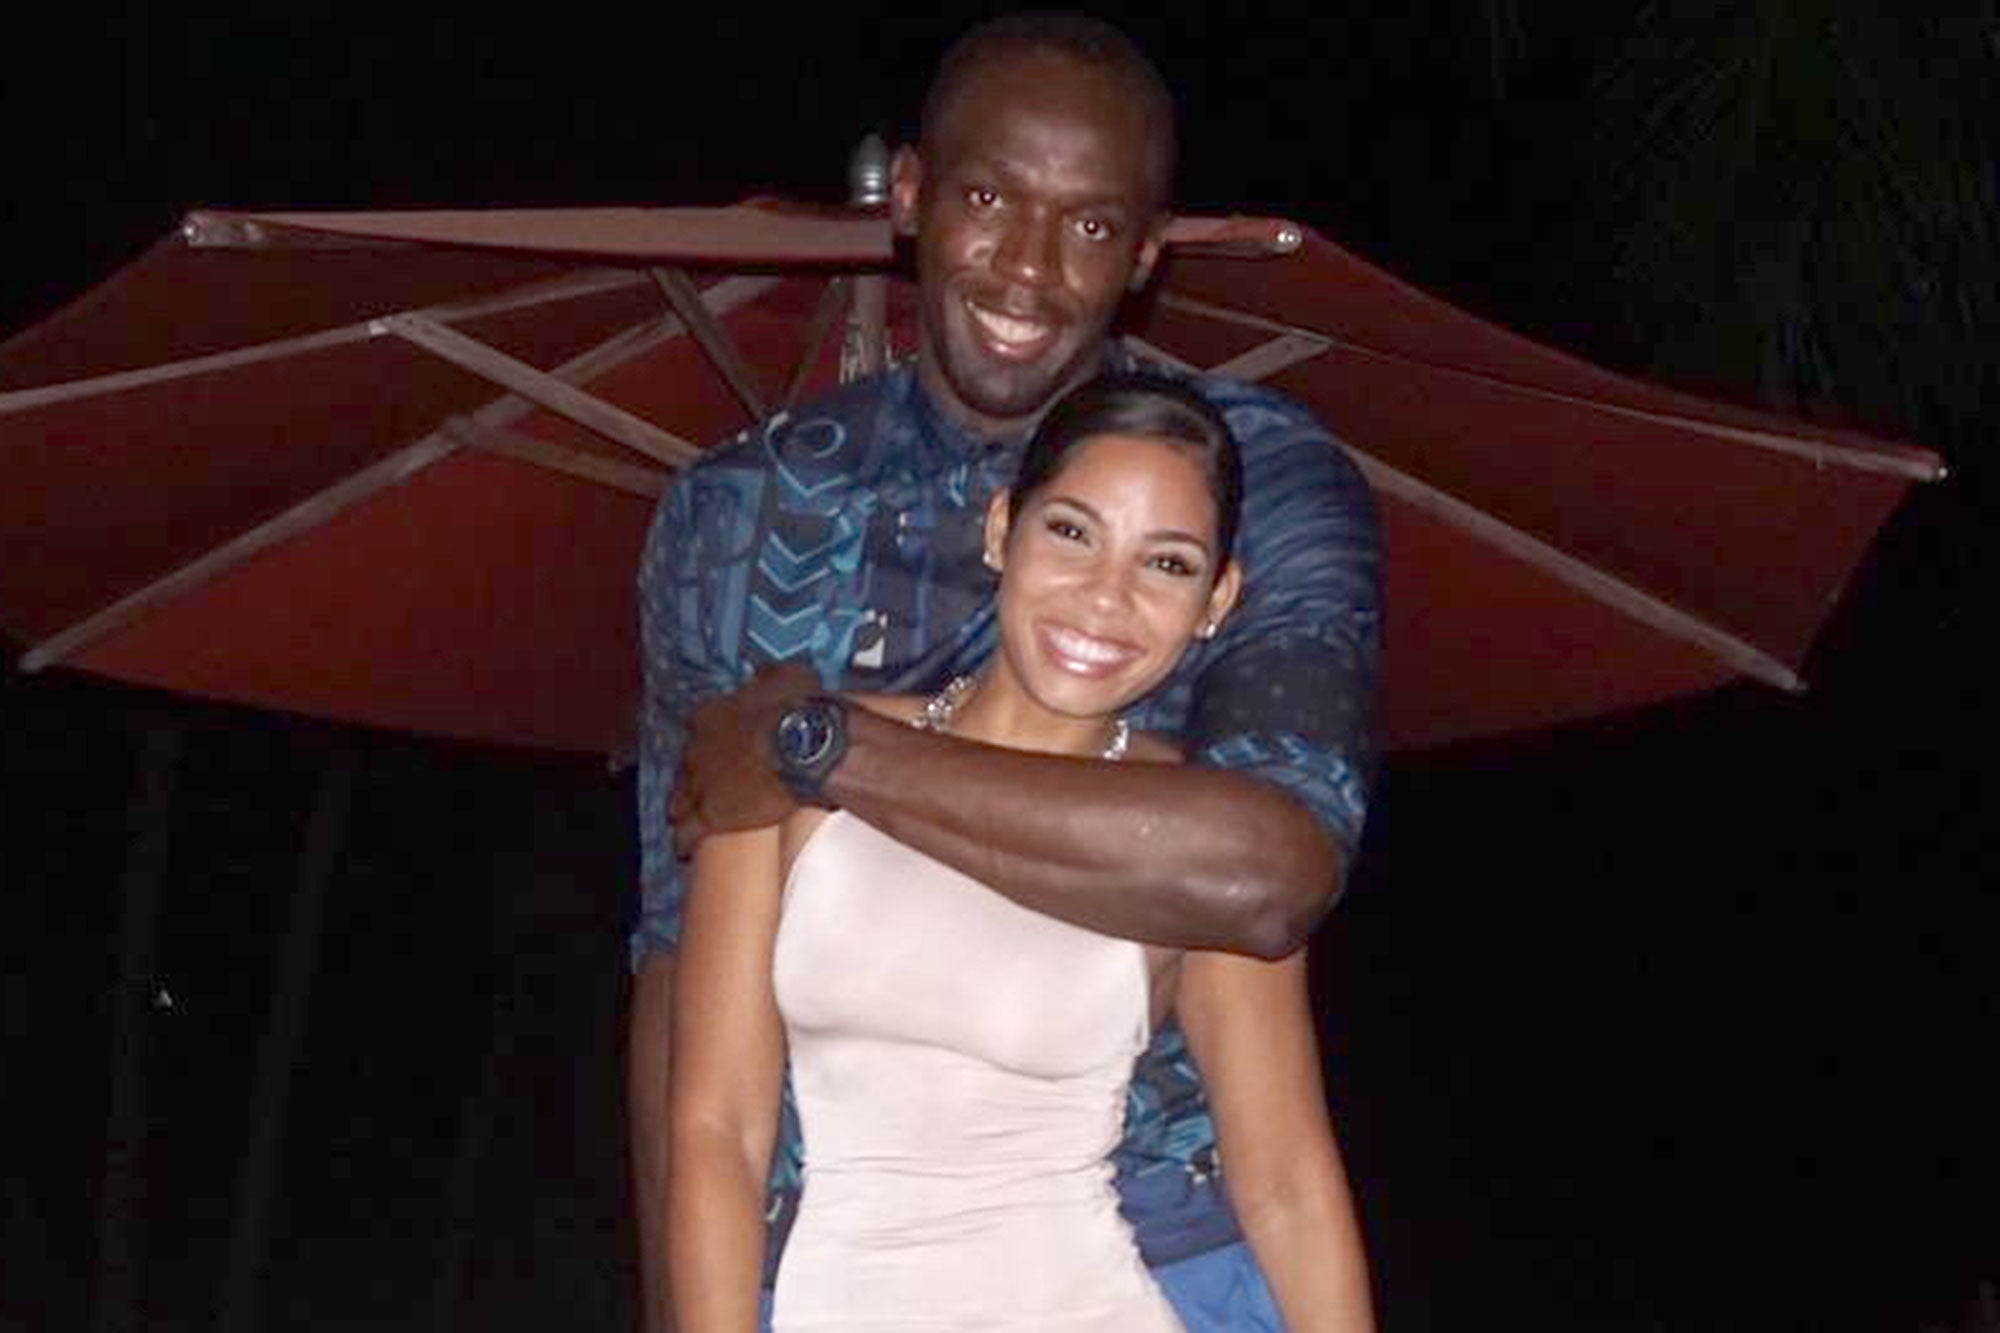 Fastest Baby Alive? Usain Bolt Says He And His Girlfriend Are 'Thinking About Kids Very Soon'
